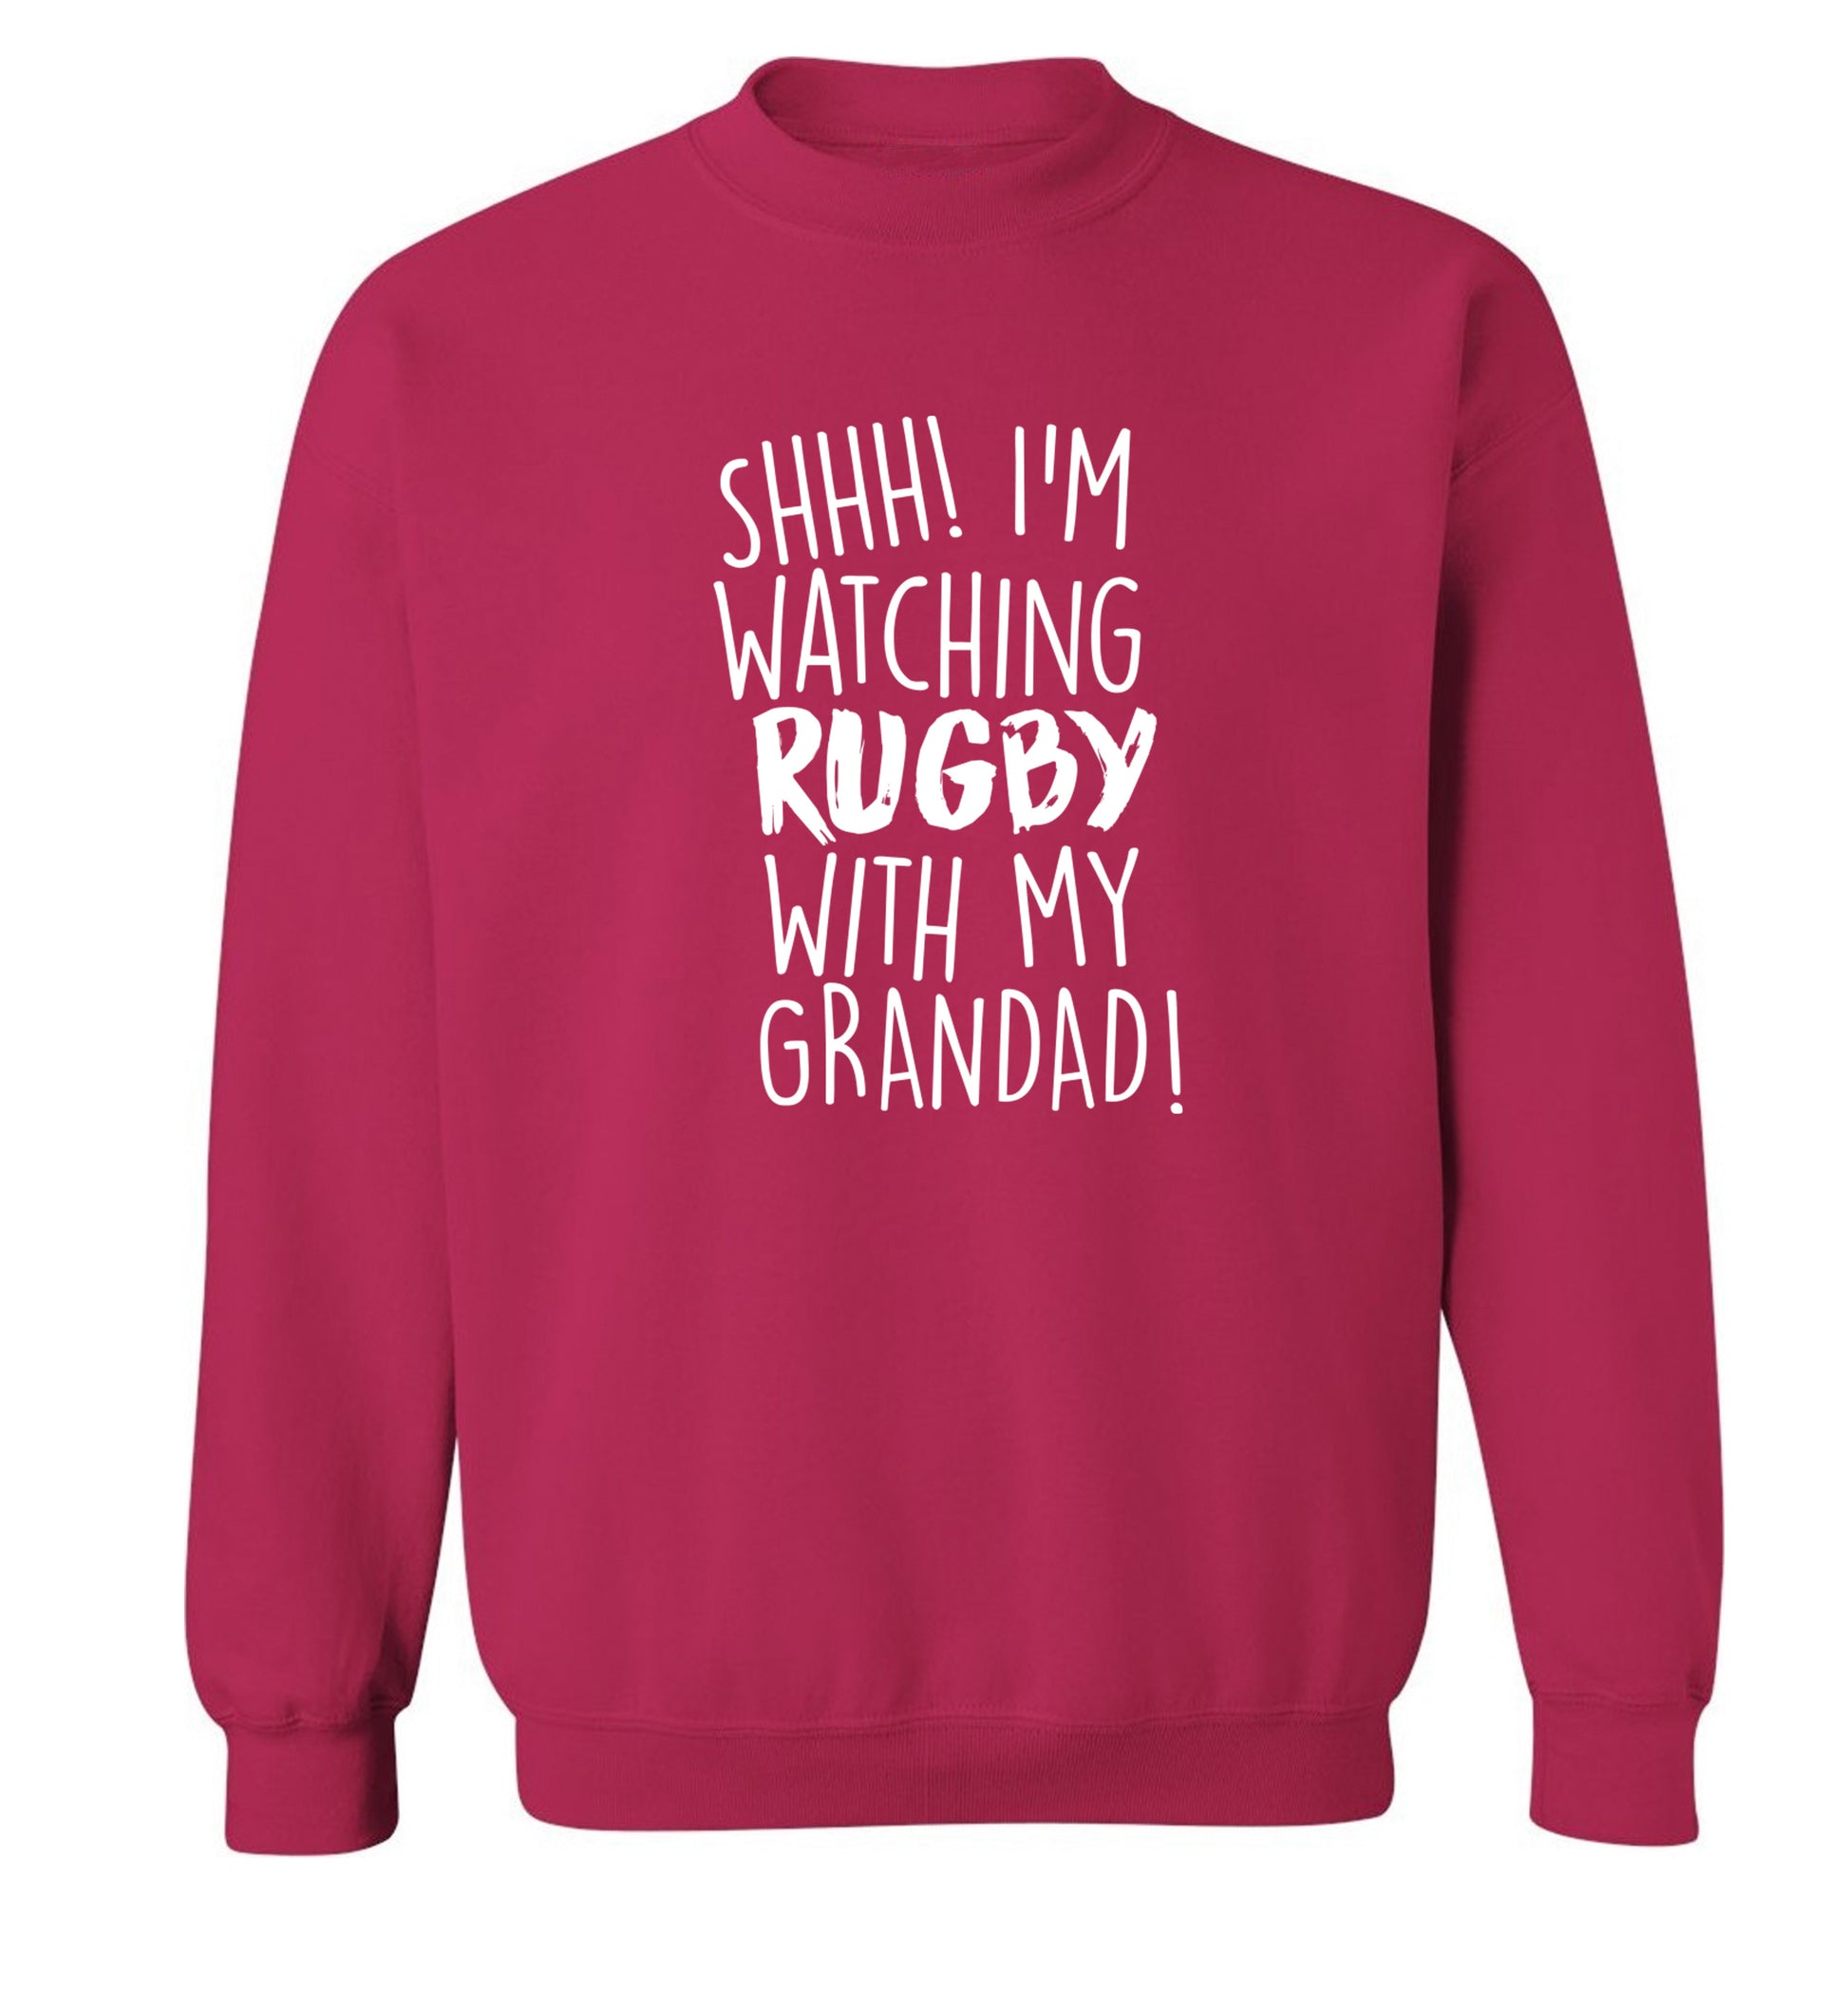 Shh I'm watching rugby with my grandaughter Adult's unisex pink Sweater 2XL